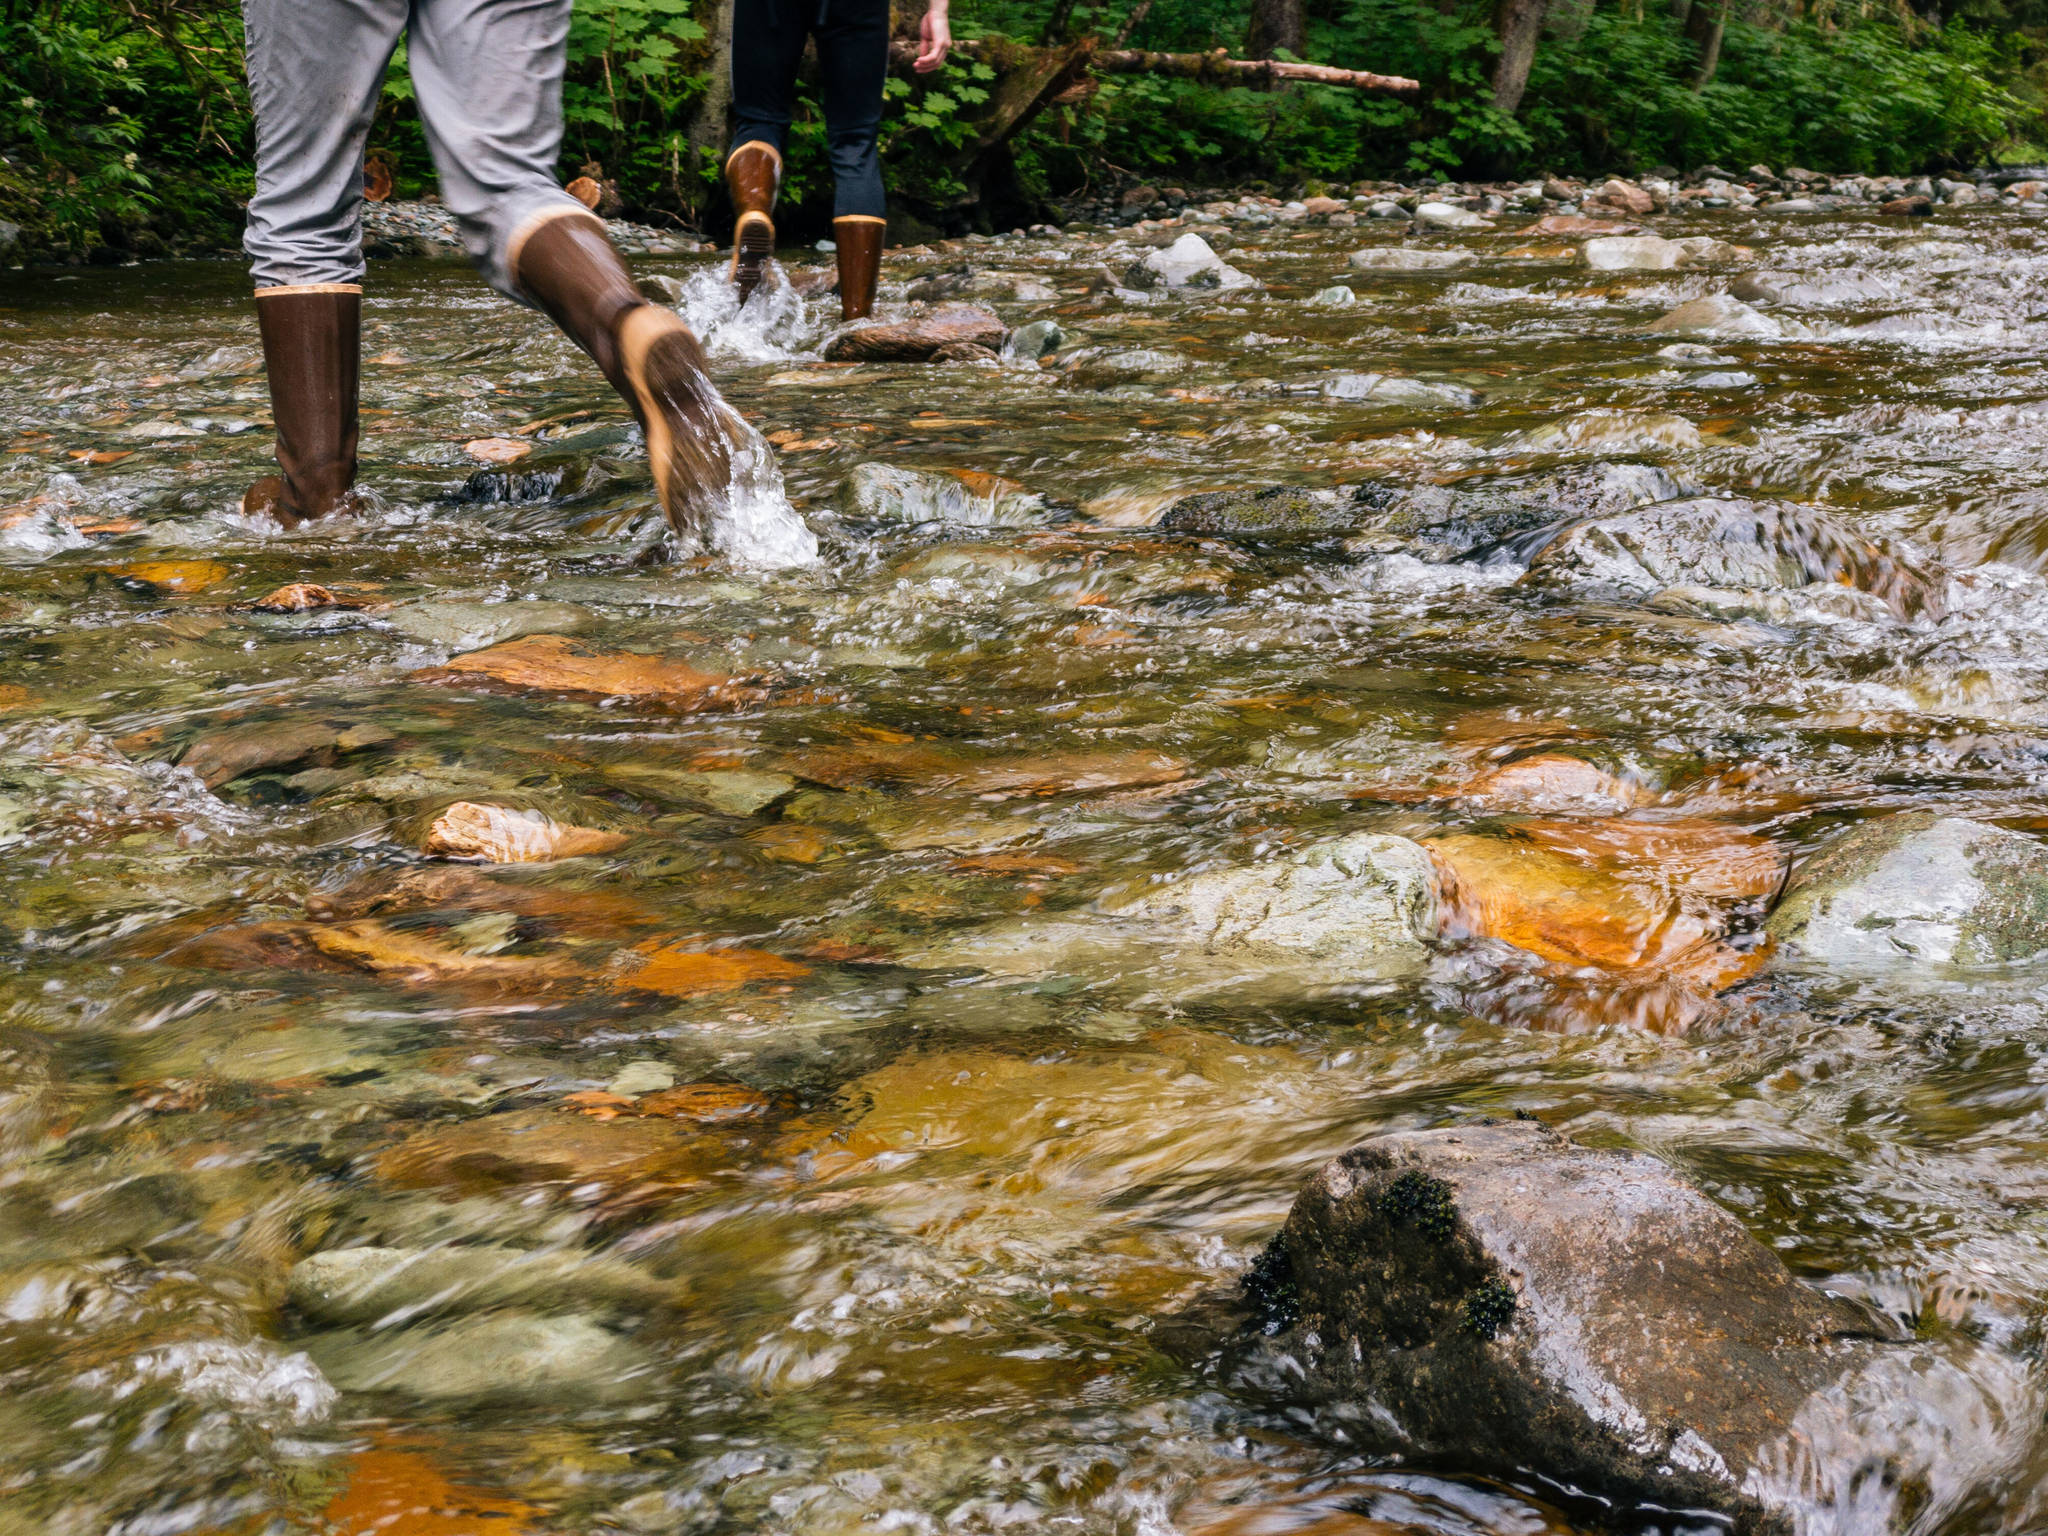 Shallow water rushes by as we cross the creek. (Photo by Gabe Donohoe)